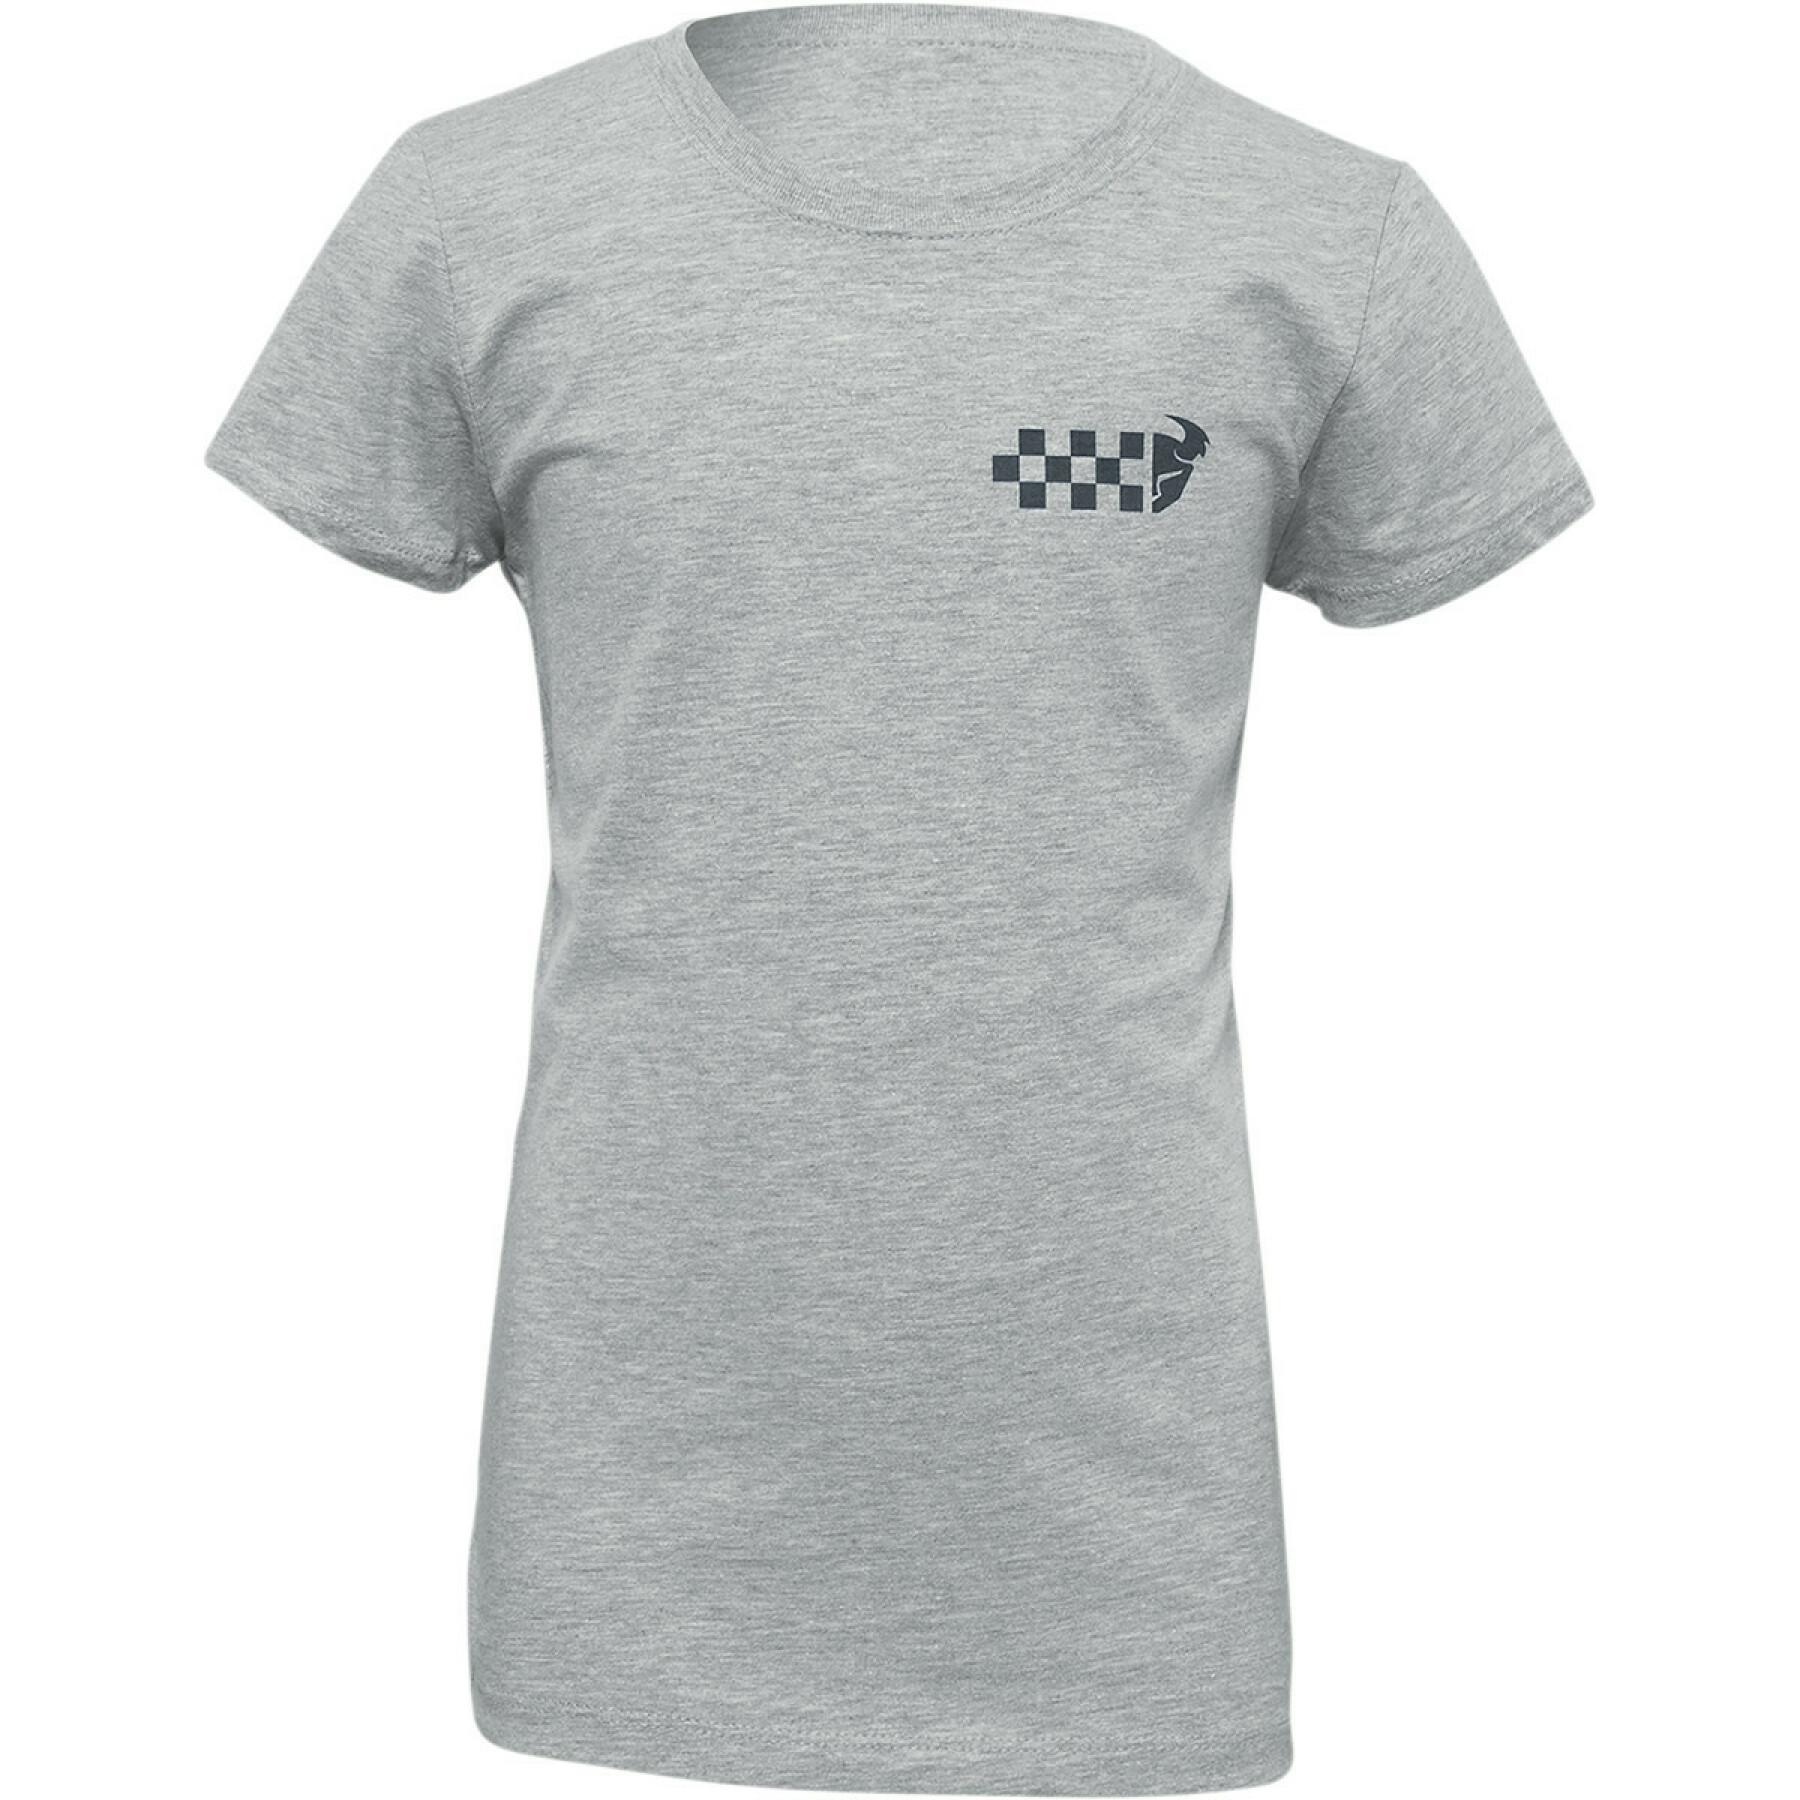 Kinder T-Shirt Thor checkers heather